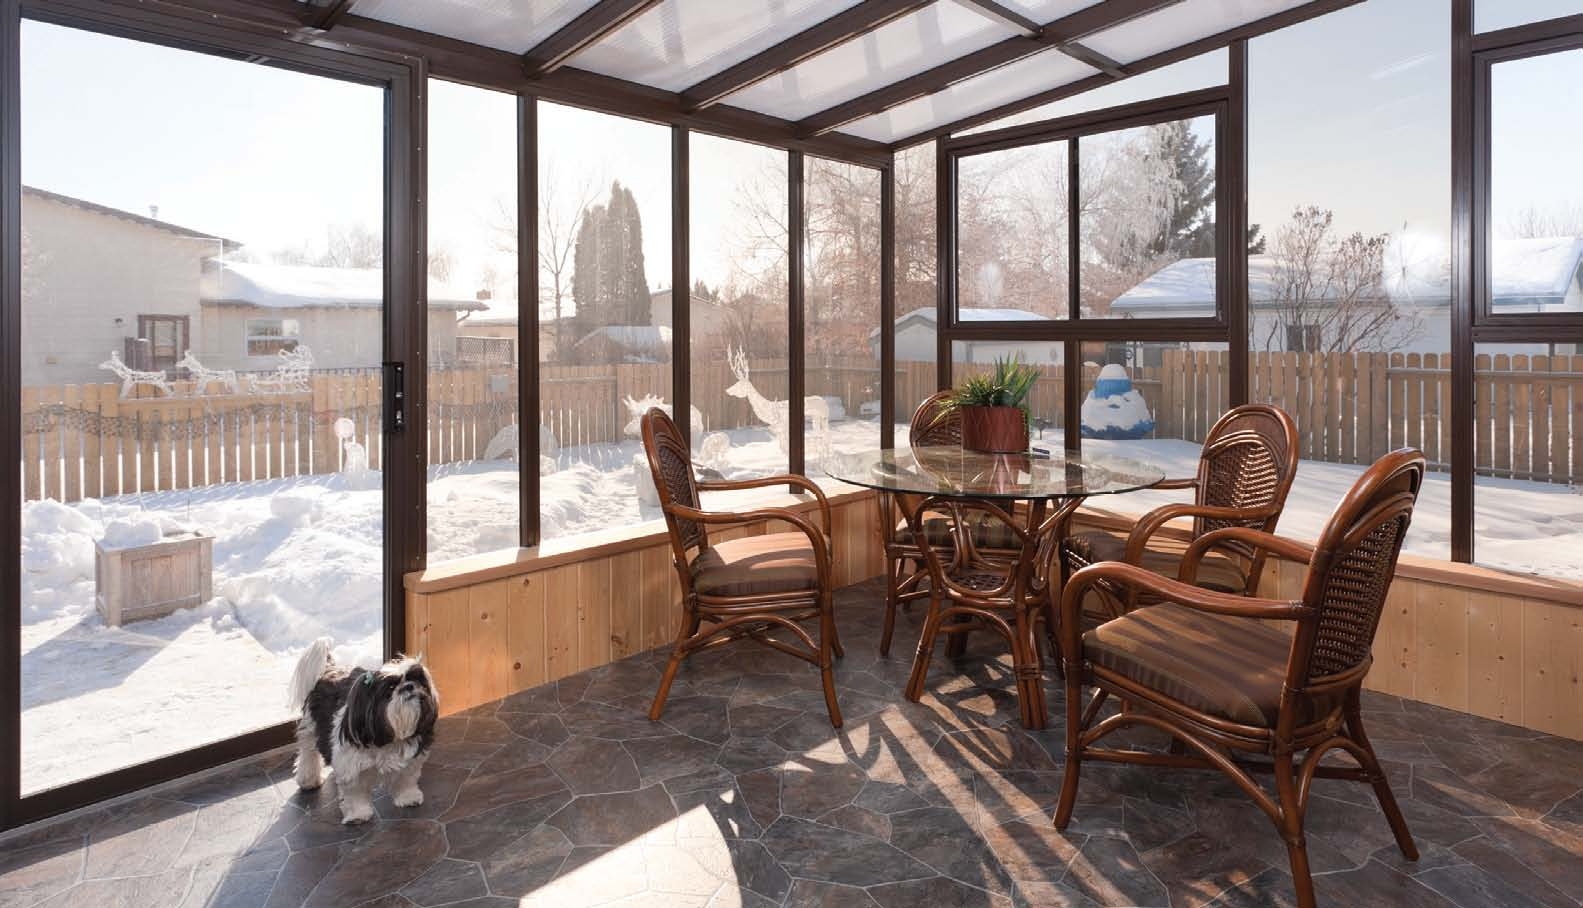 An interior view of a sunroom in winter